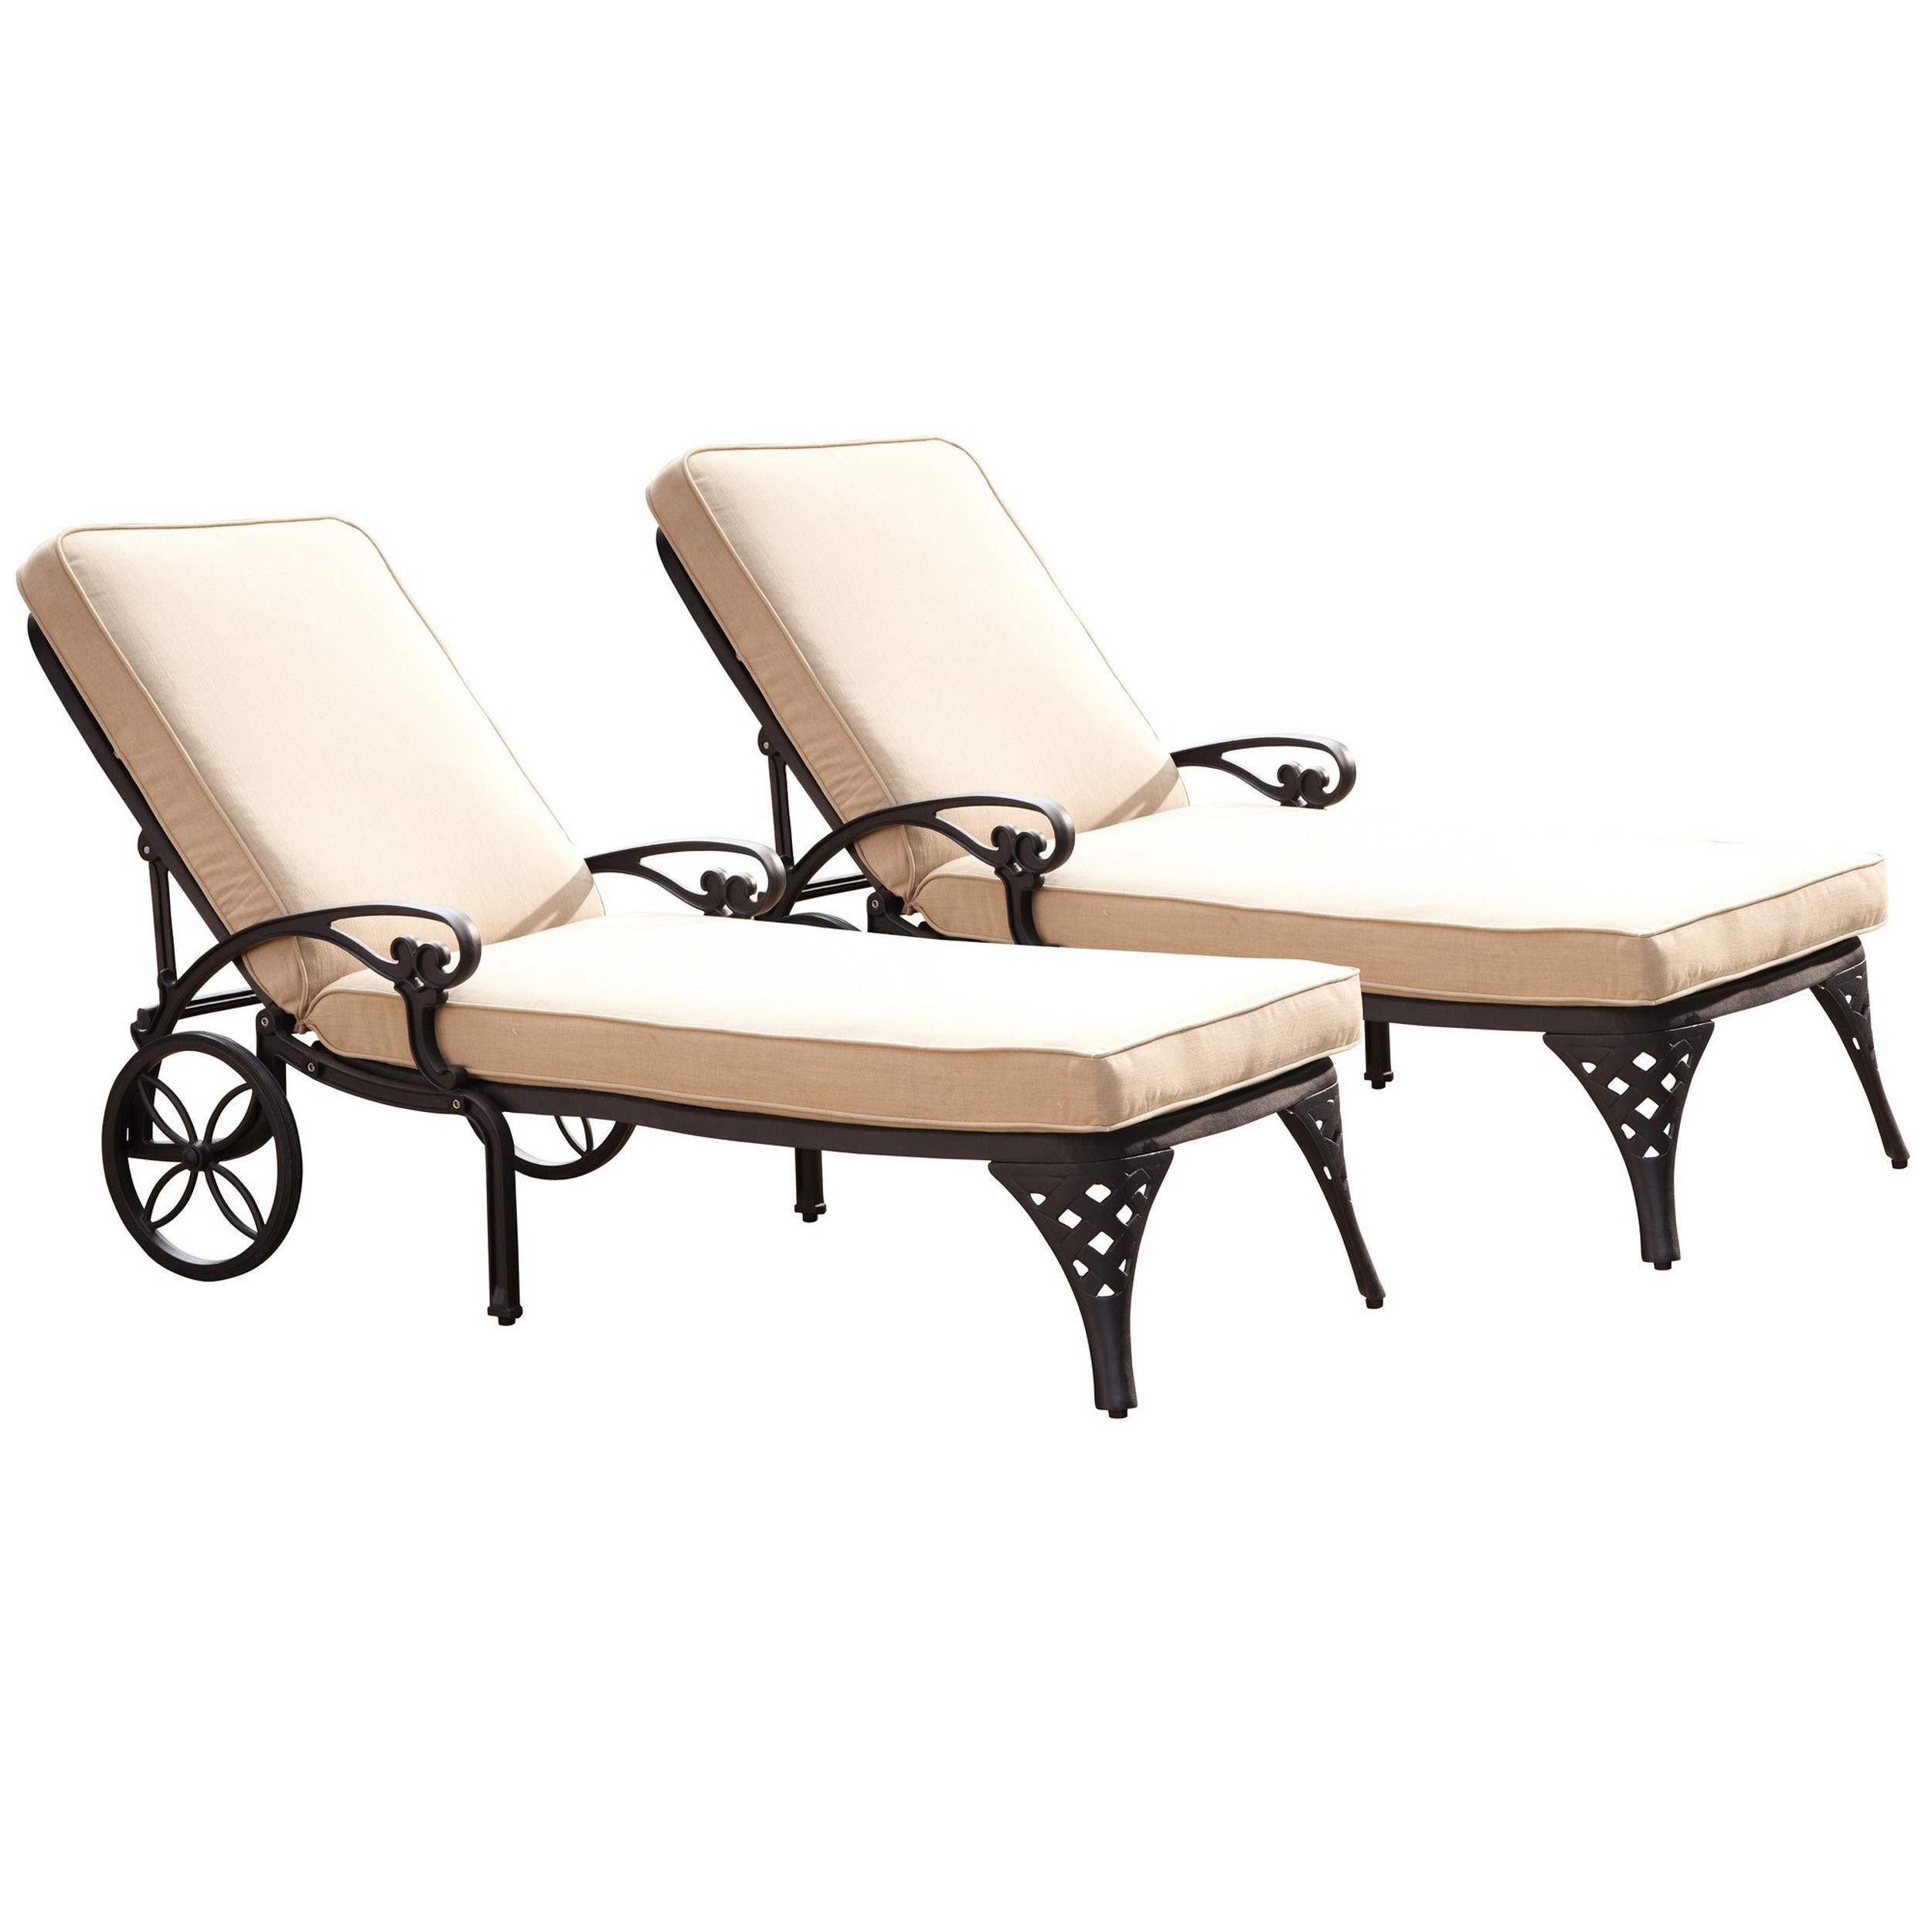 Home Styles Biscayne Black Chaise Lounge Chairs (2) Taupe